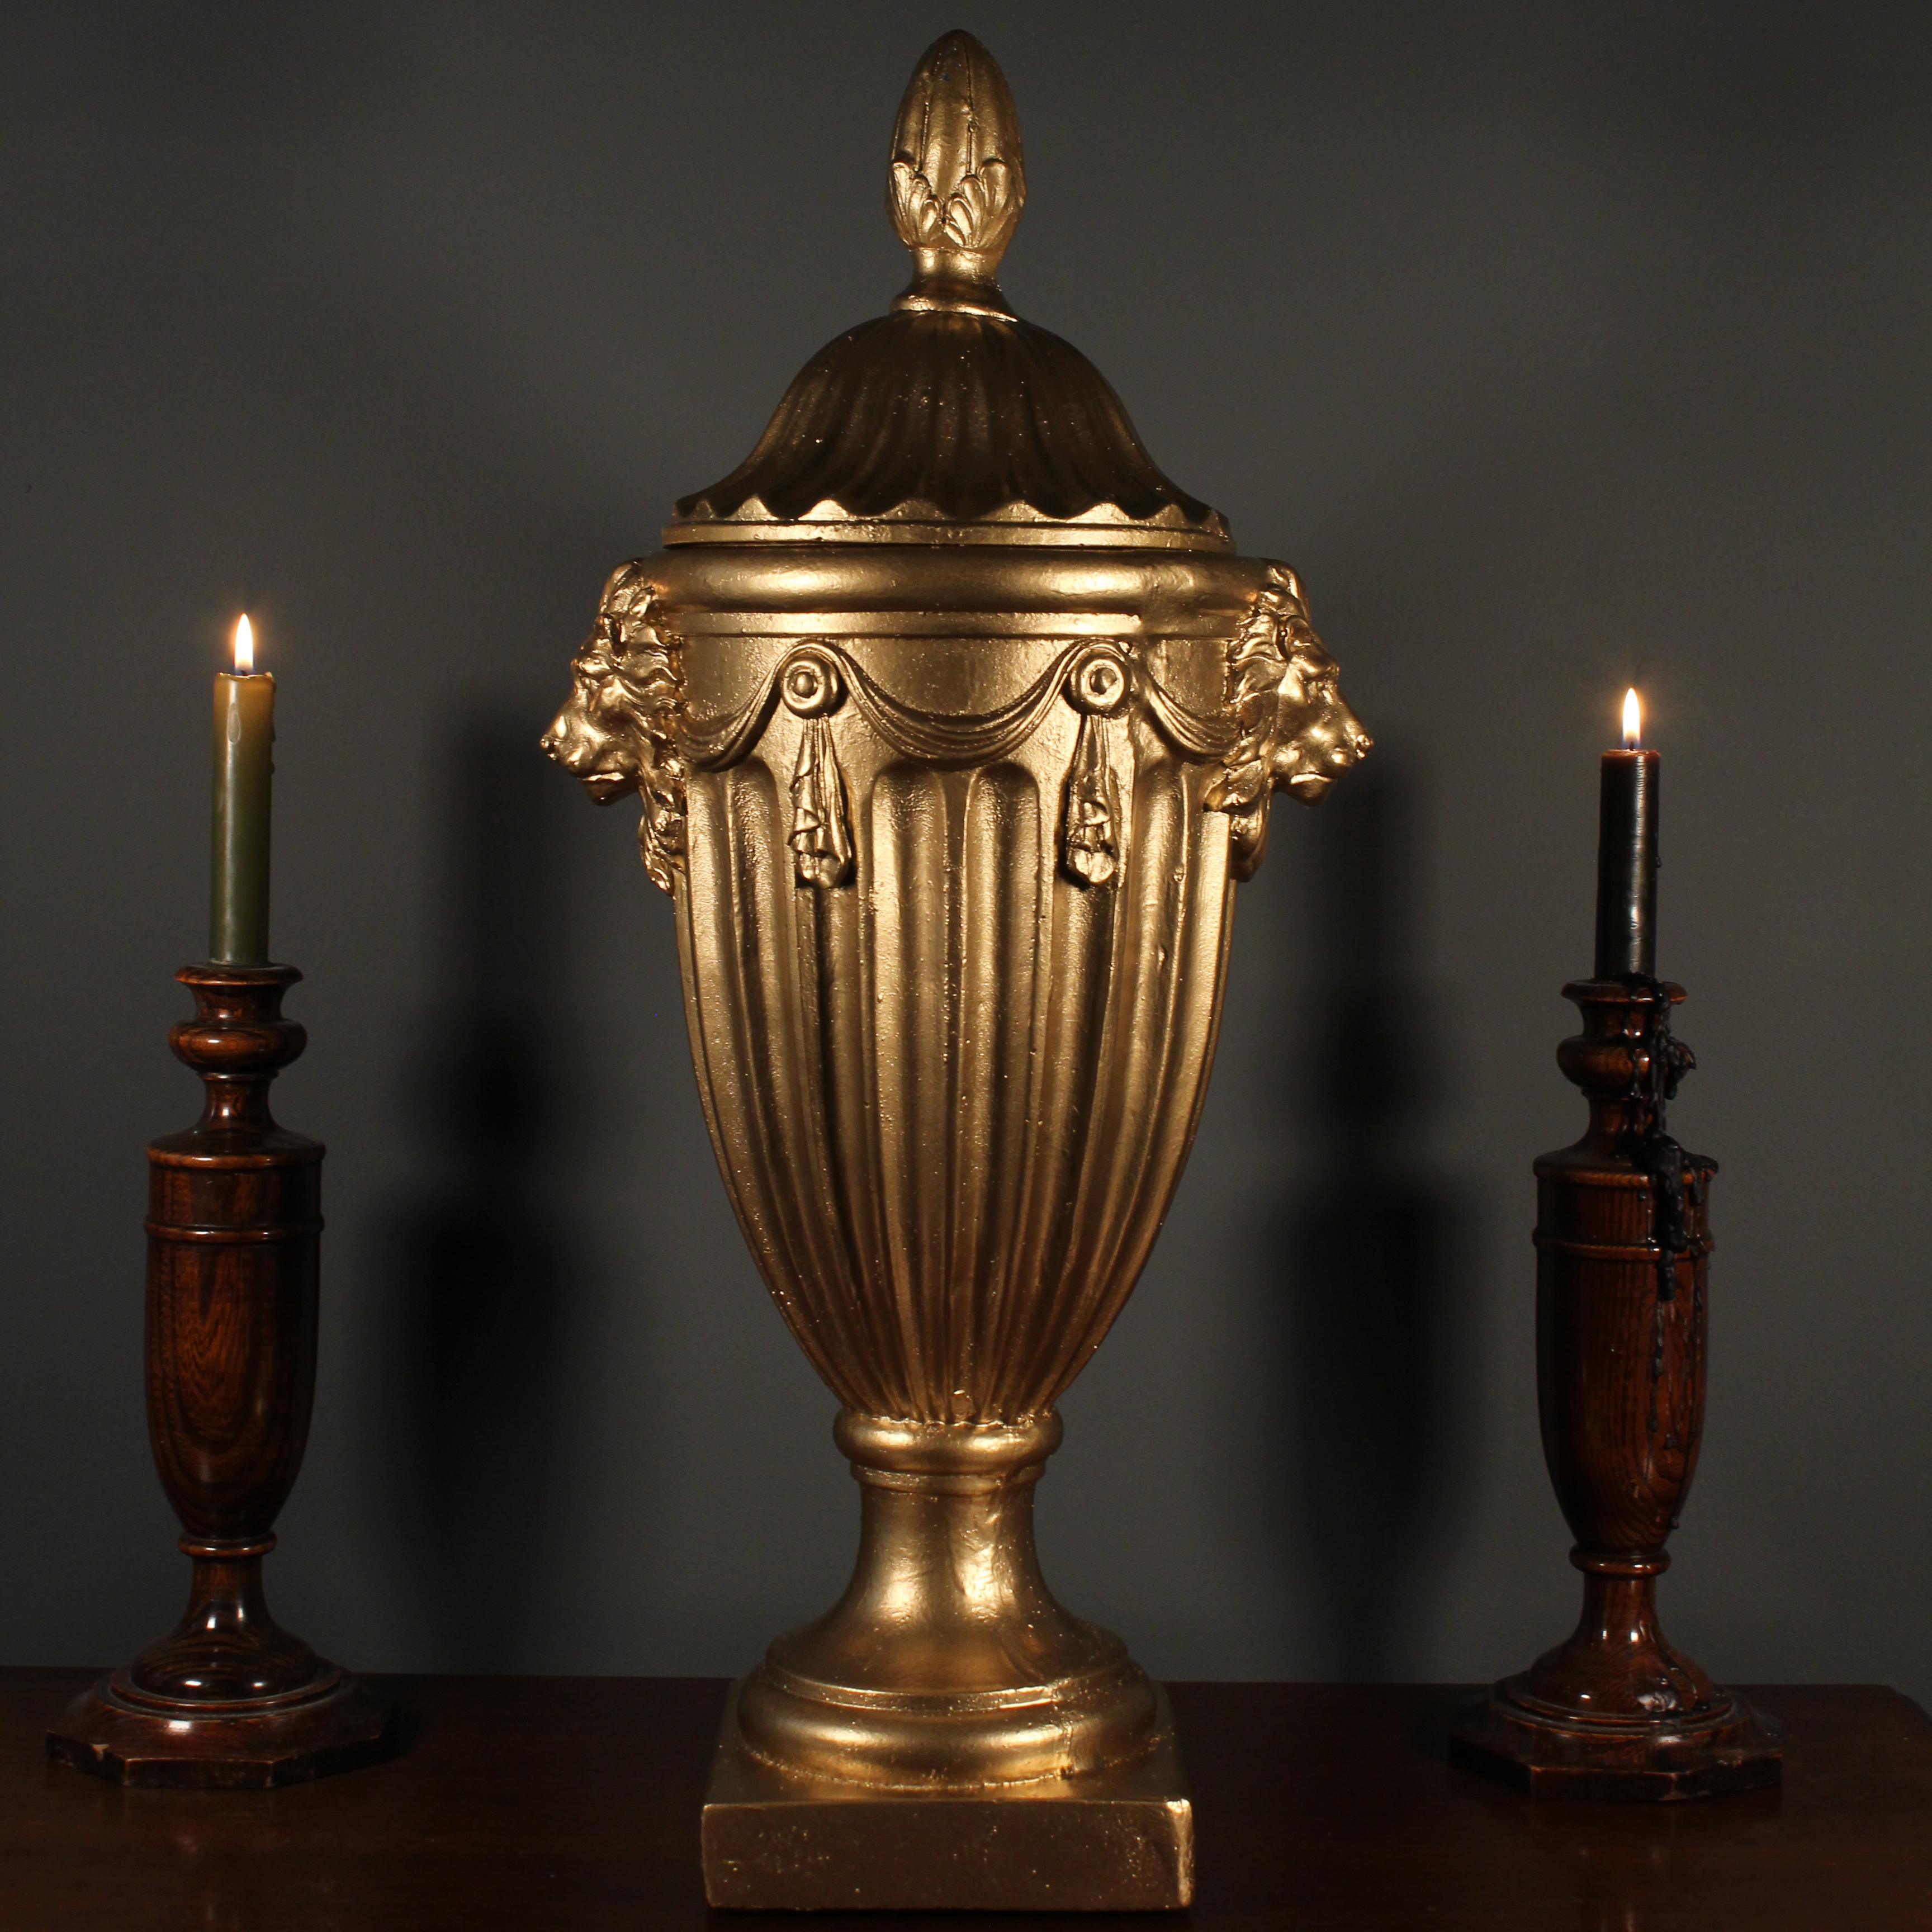 Urn Ornament - Extra Large